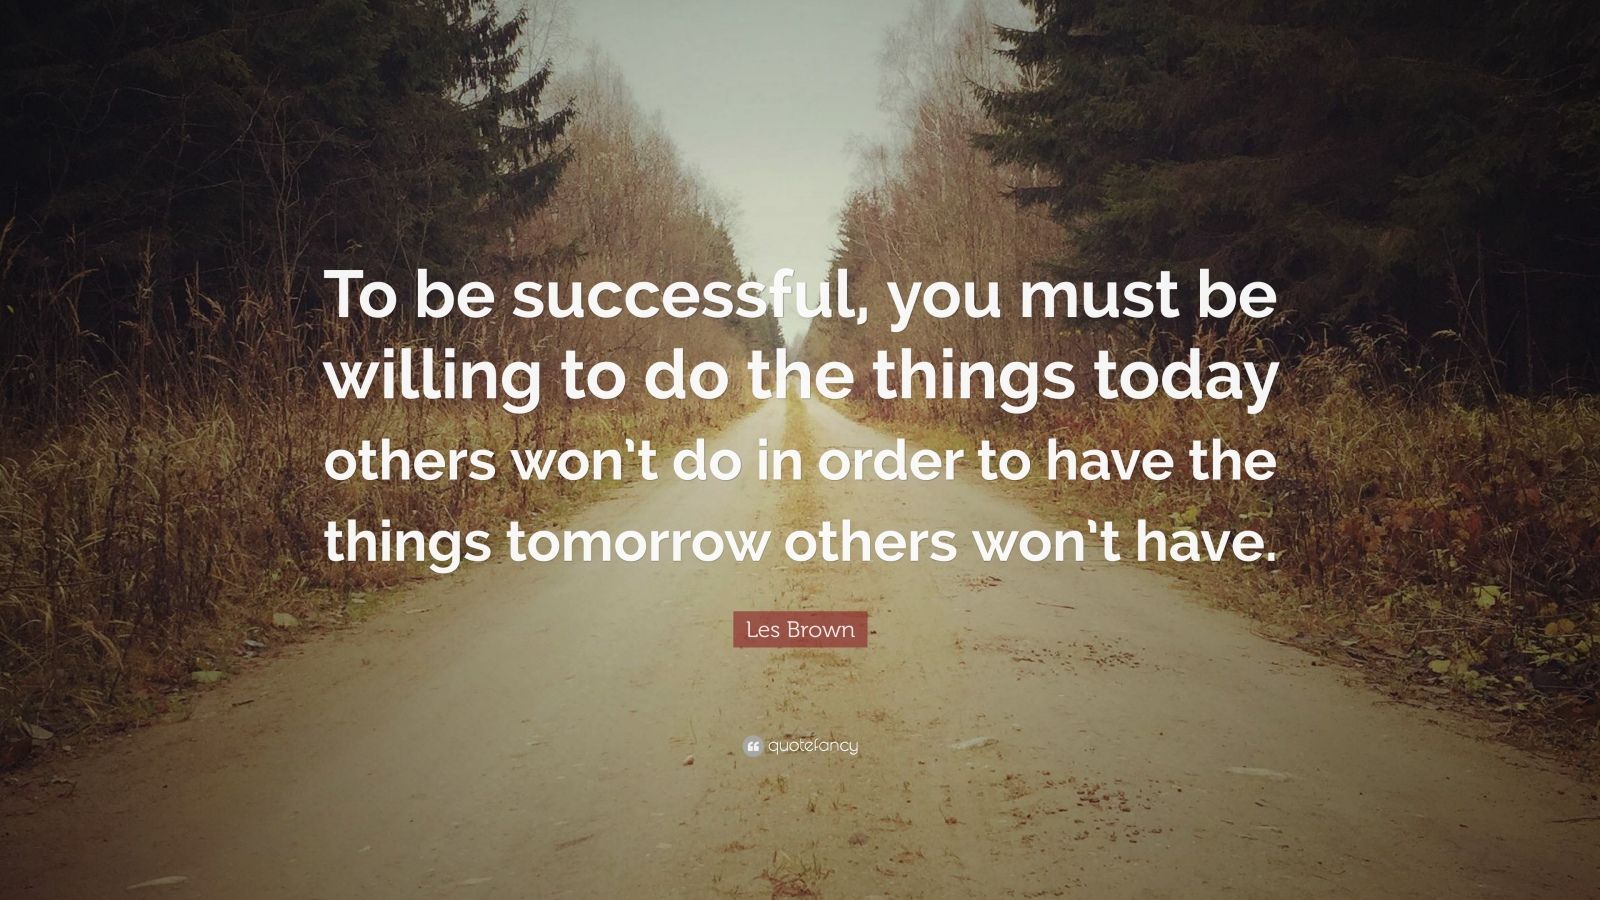 Les Brown Quote: “To be successful, you must be willing to do the